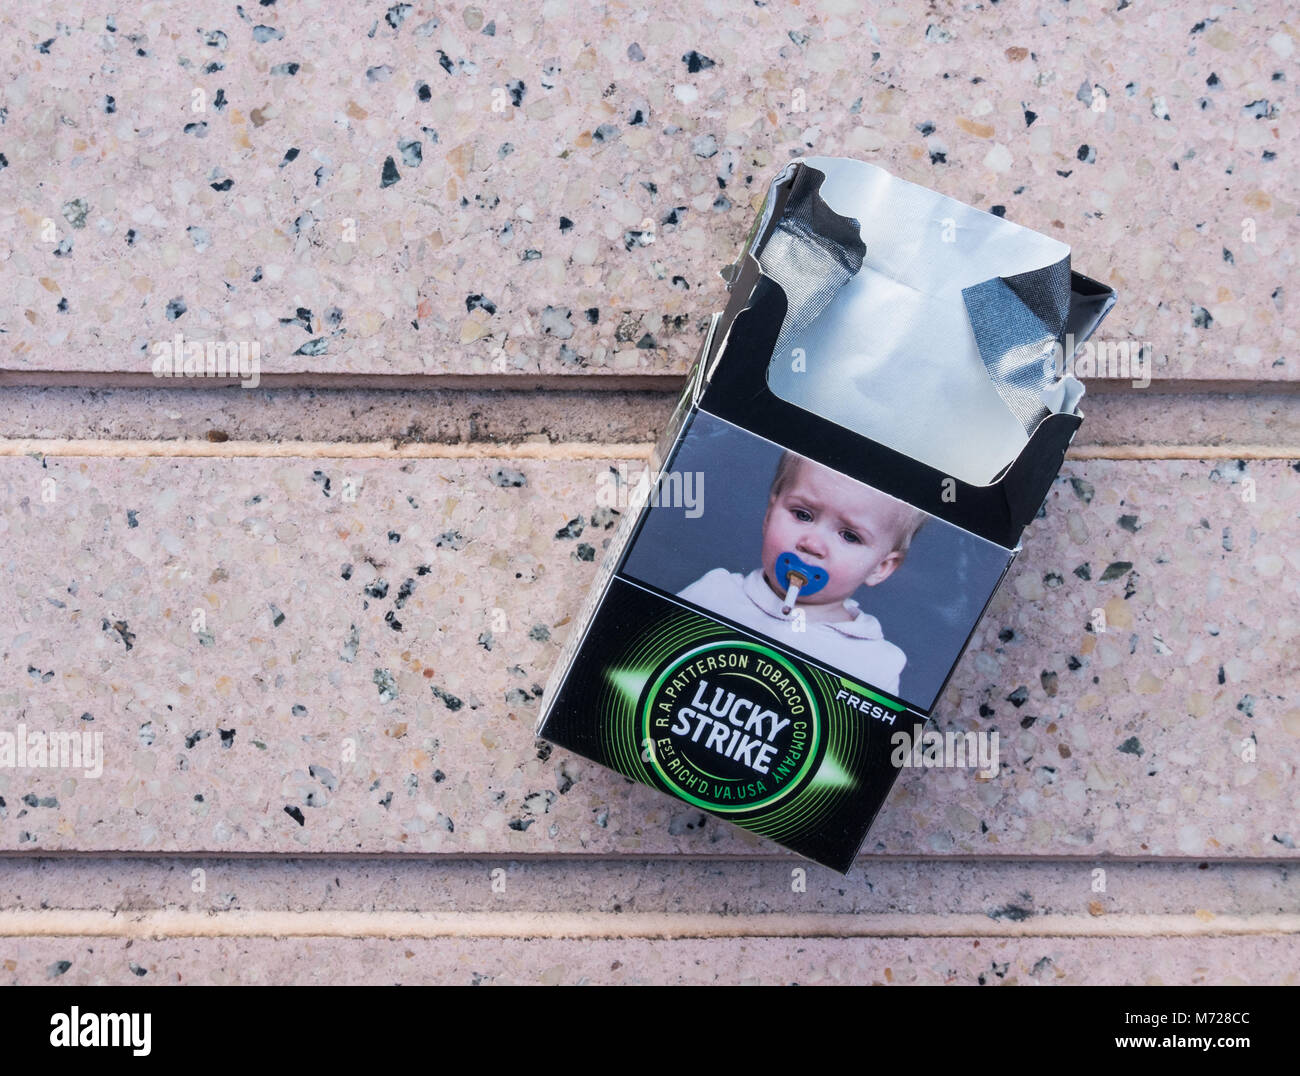 Health warning on discarded cigarette packet in Spain depicting a baby`s dummy with cigarette. Stock Photo